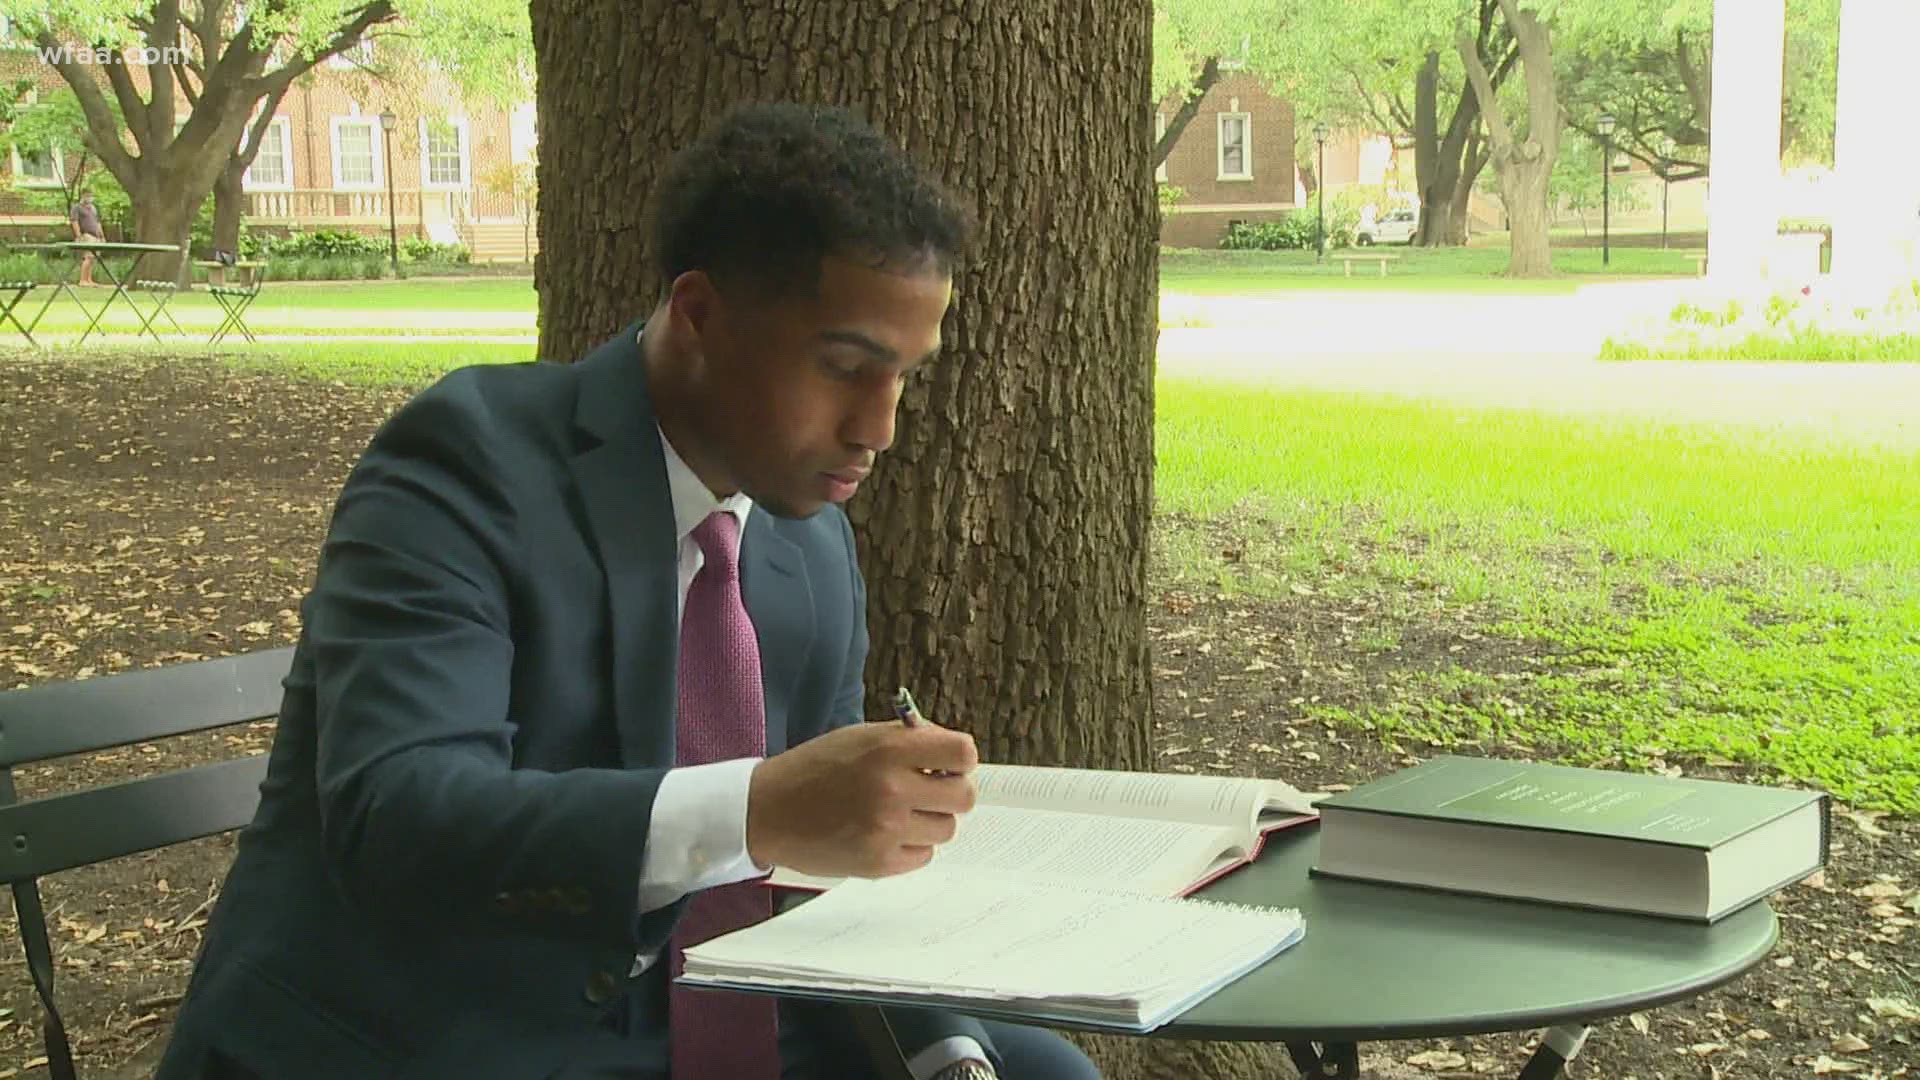 Kevin Lee wants to be a judge and fight for kids just like him who don't have a permanent address. So he's going to law school at one of the top colleges in the U.S.